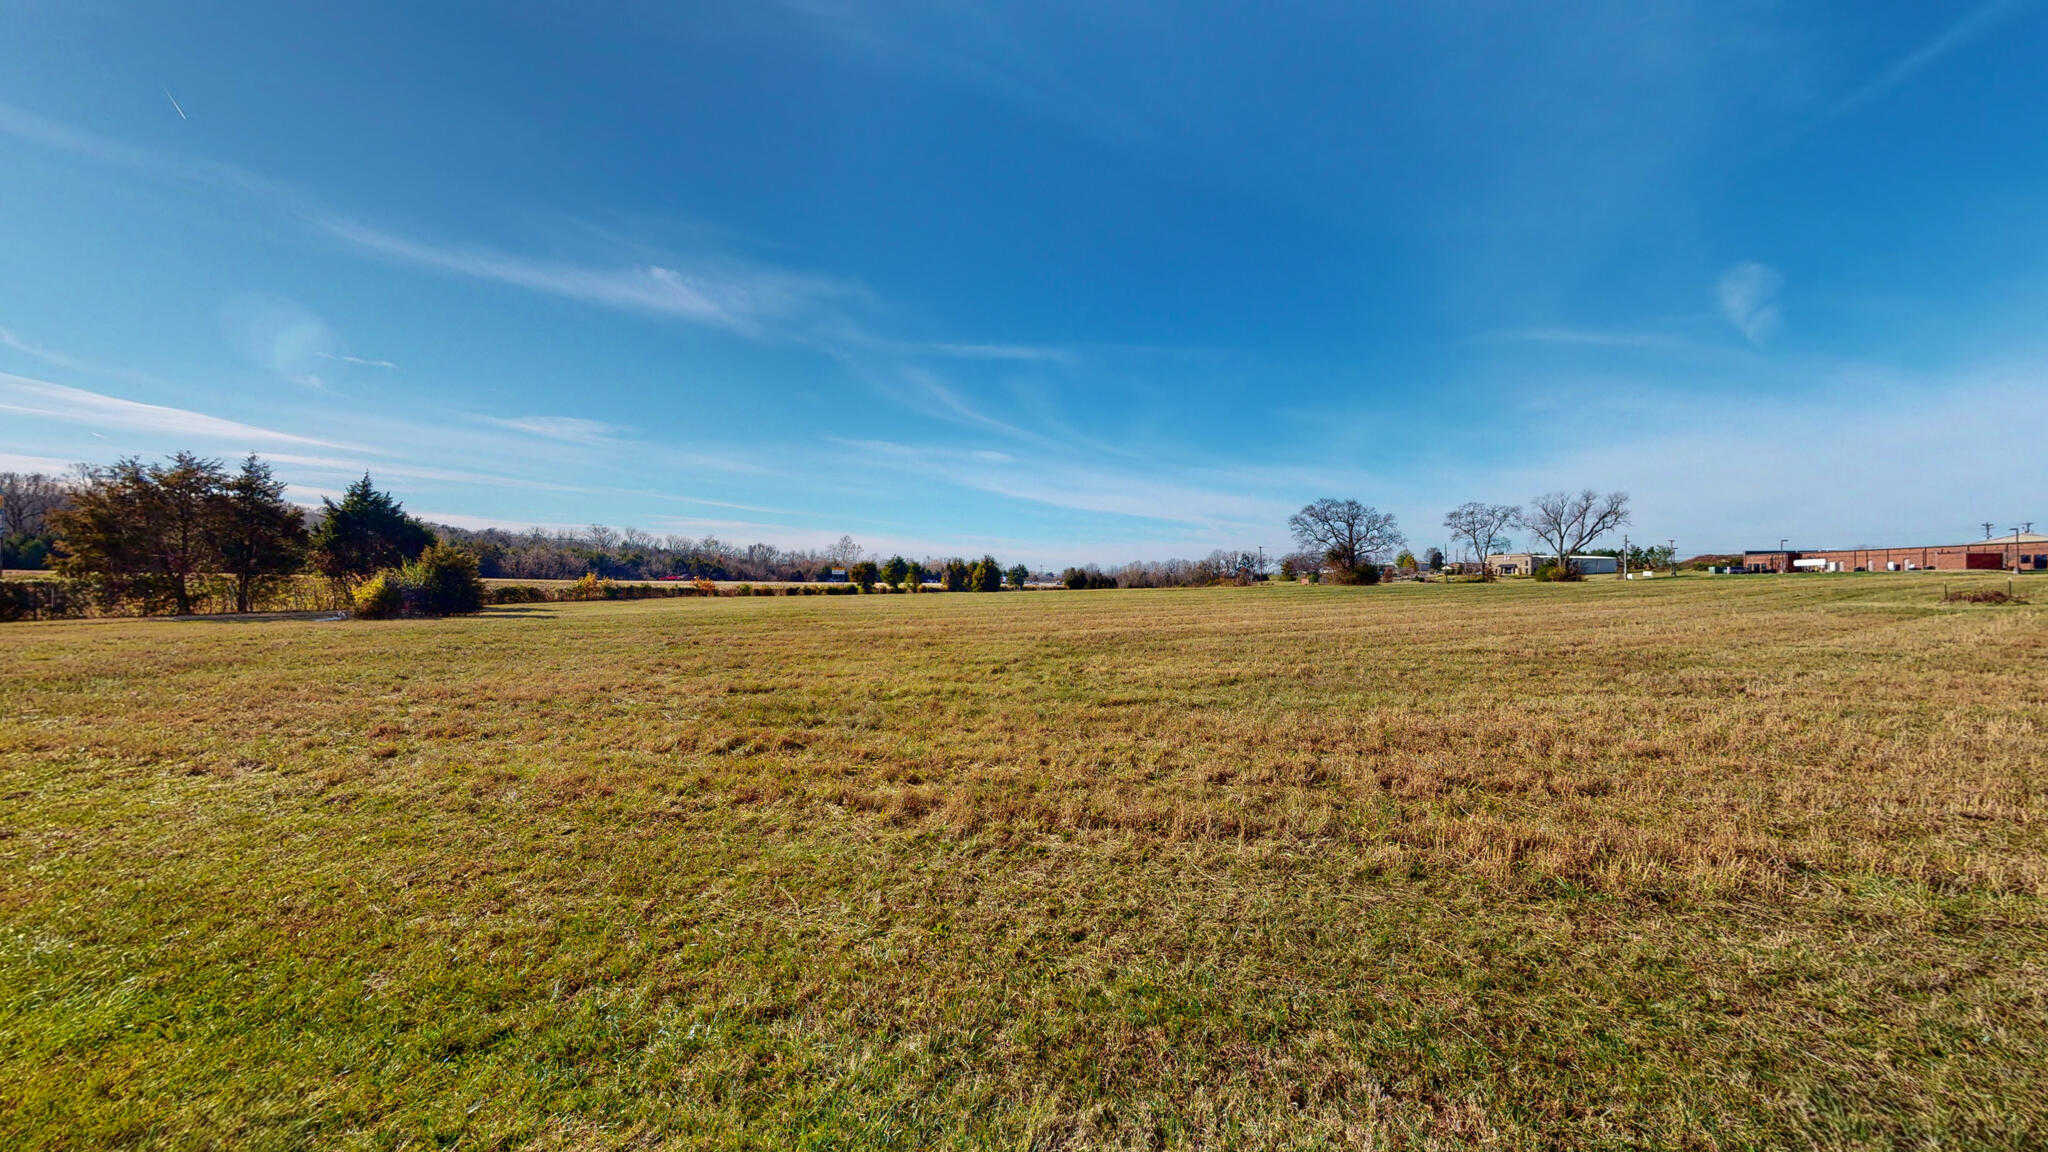 View Spring Hill, TN 37174 property